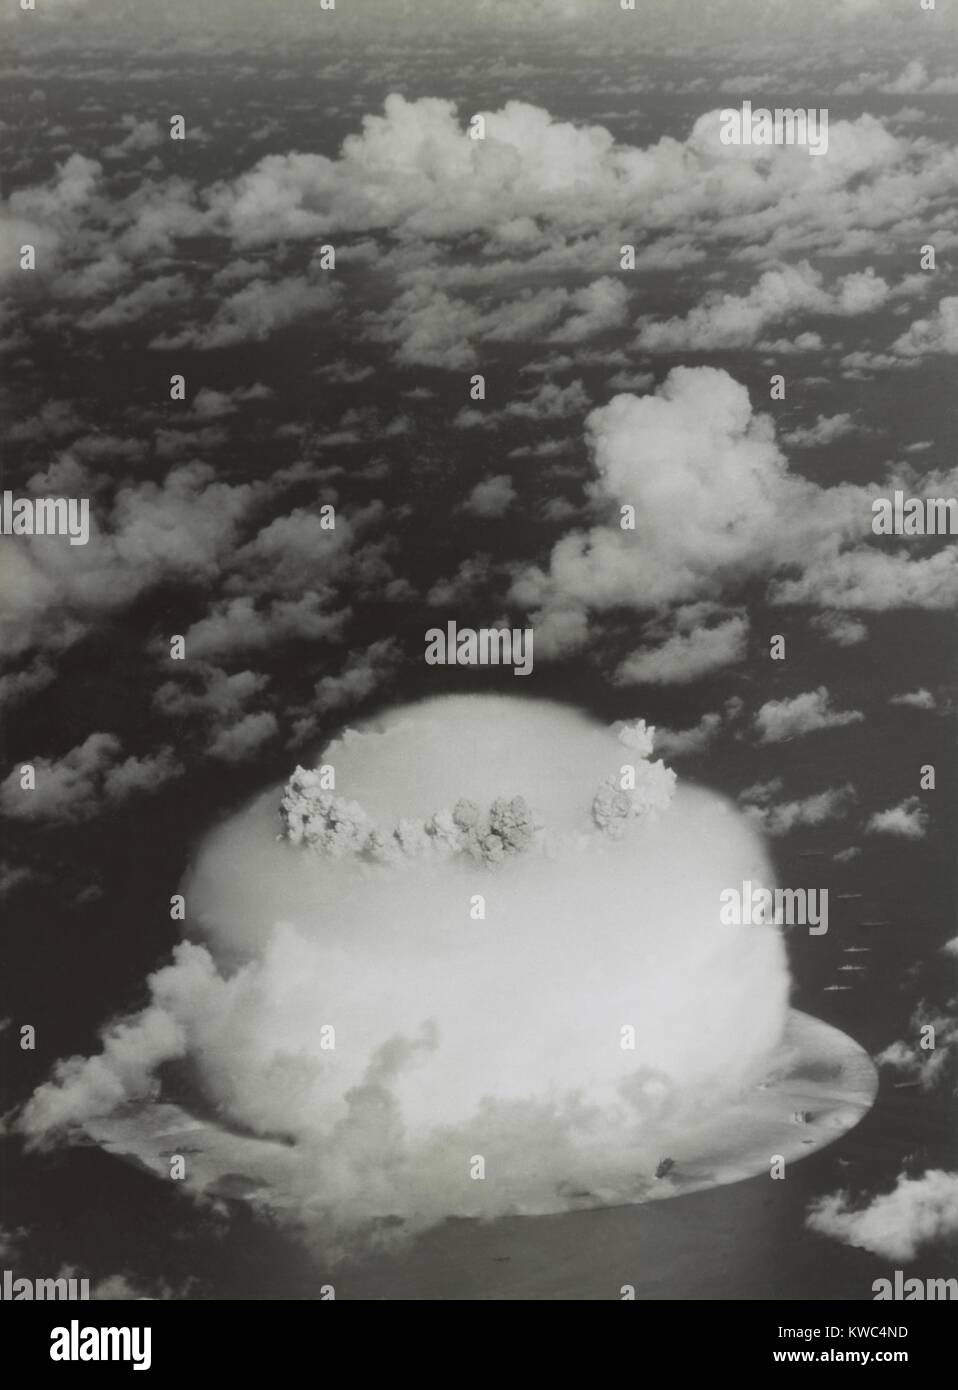 The BAKER test of Operation Crossroads, July 25, 1946. Photo shows the dome shaped condensation cloud around the gas bubble of the fireball. (BSLOC 2015 2 3) Stock Photo